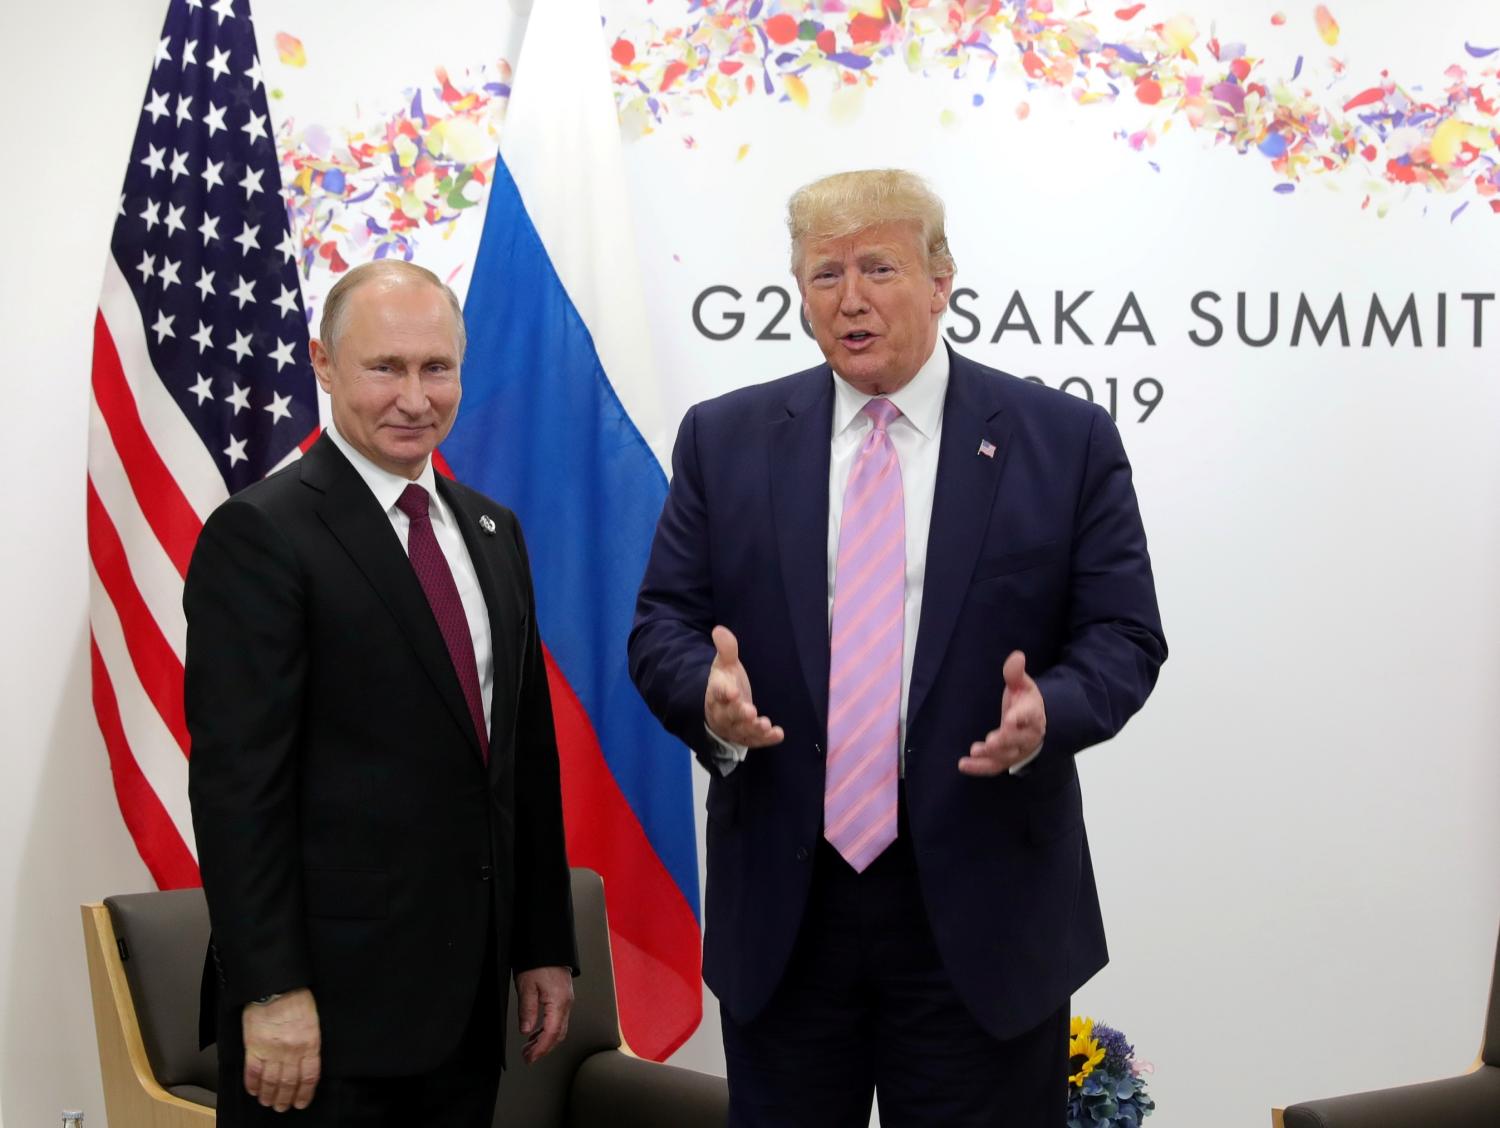 Russia's President Vladimir Putin and U.S. President Donald Trump attend a meeting on the sidelines of the G20 summit in Osaka, Japan June 28, 2019. Sputnik/Mikhail Klimentyev/Kremlin via REUTERS  ATTENTION EDITORS - THIS IMAGE WAS PROVIDED BY A THIRD PARTY. - RC187F8F9730